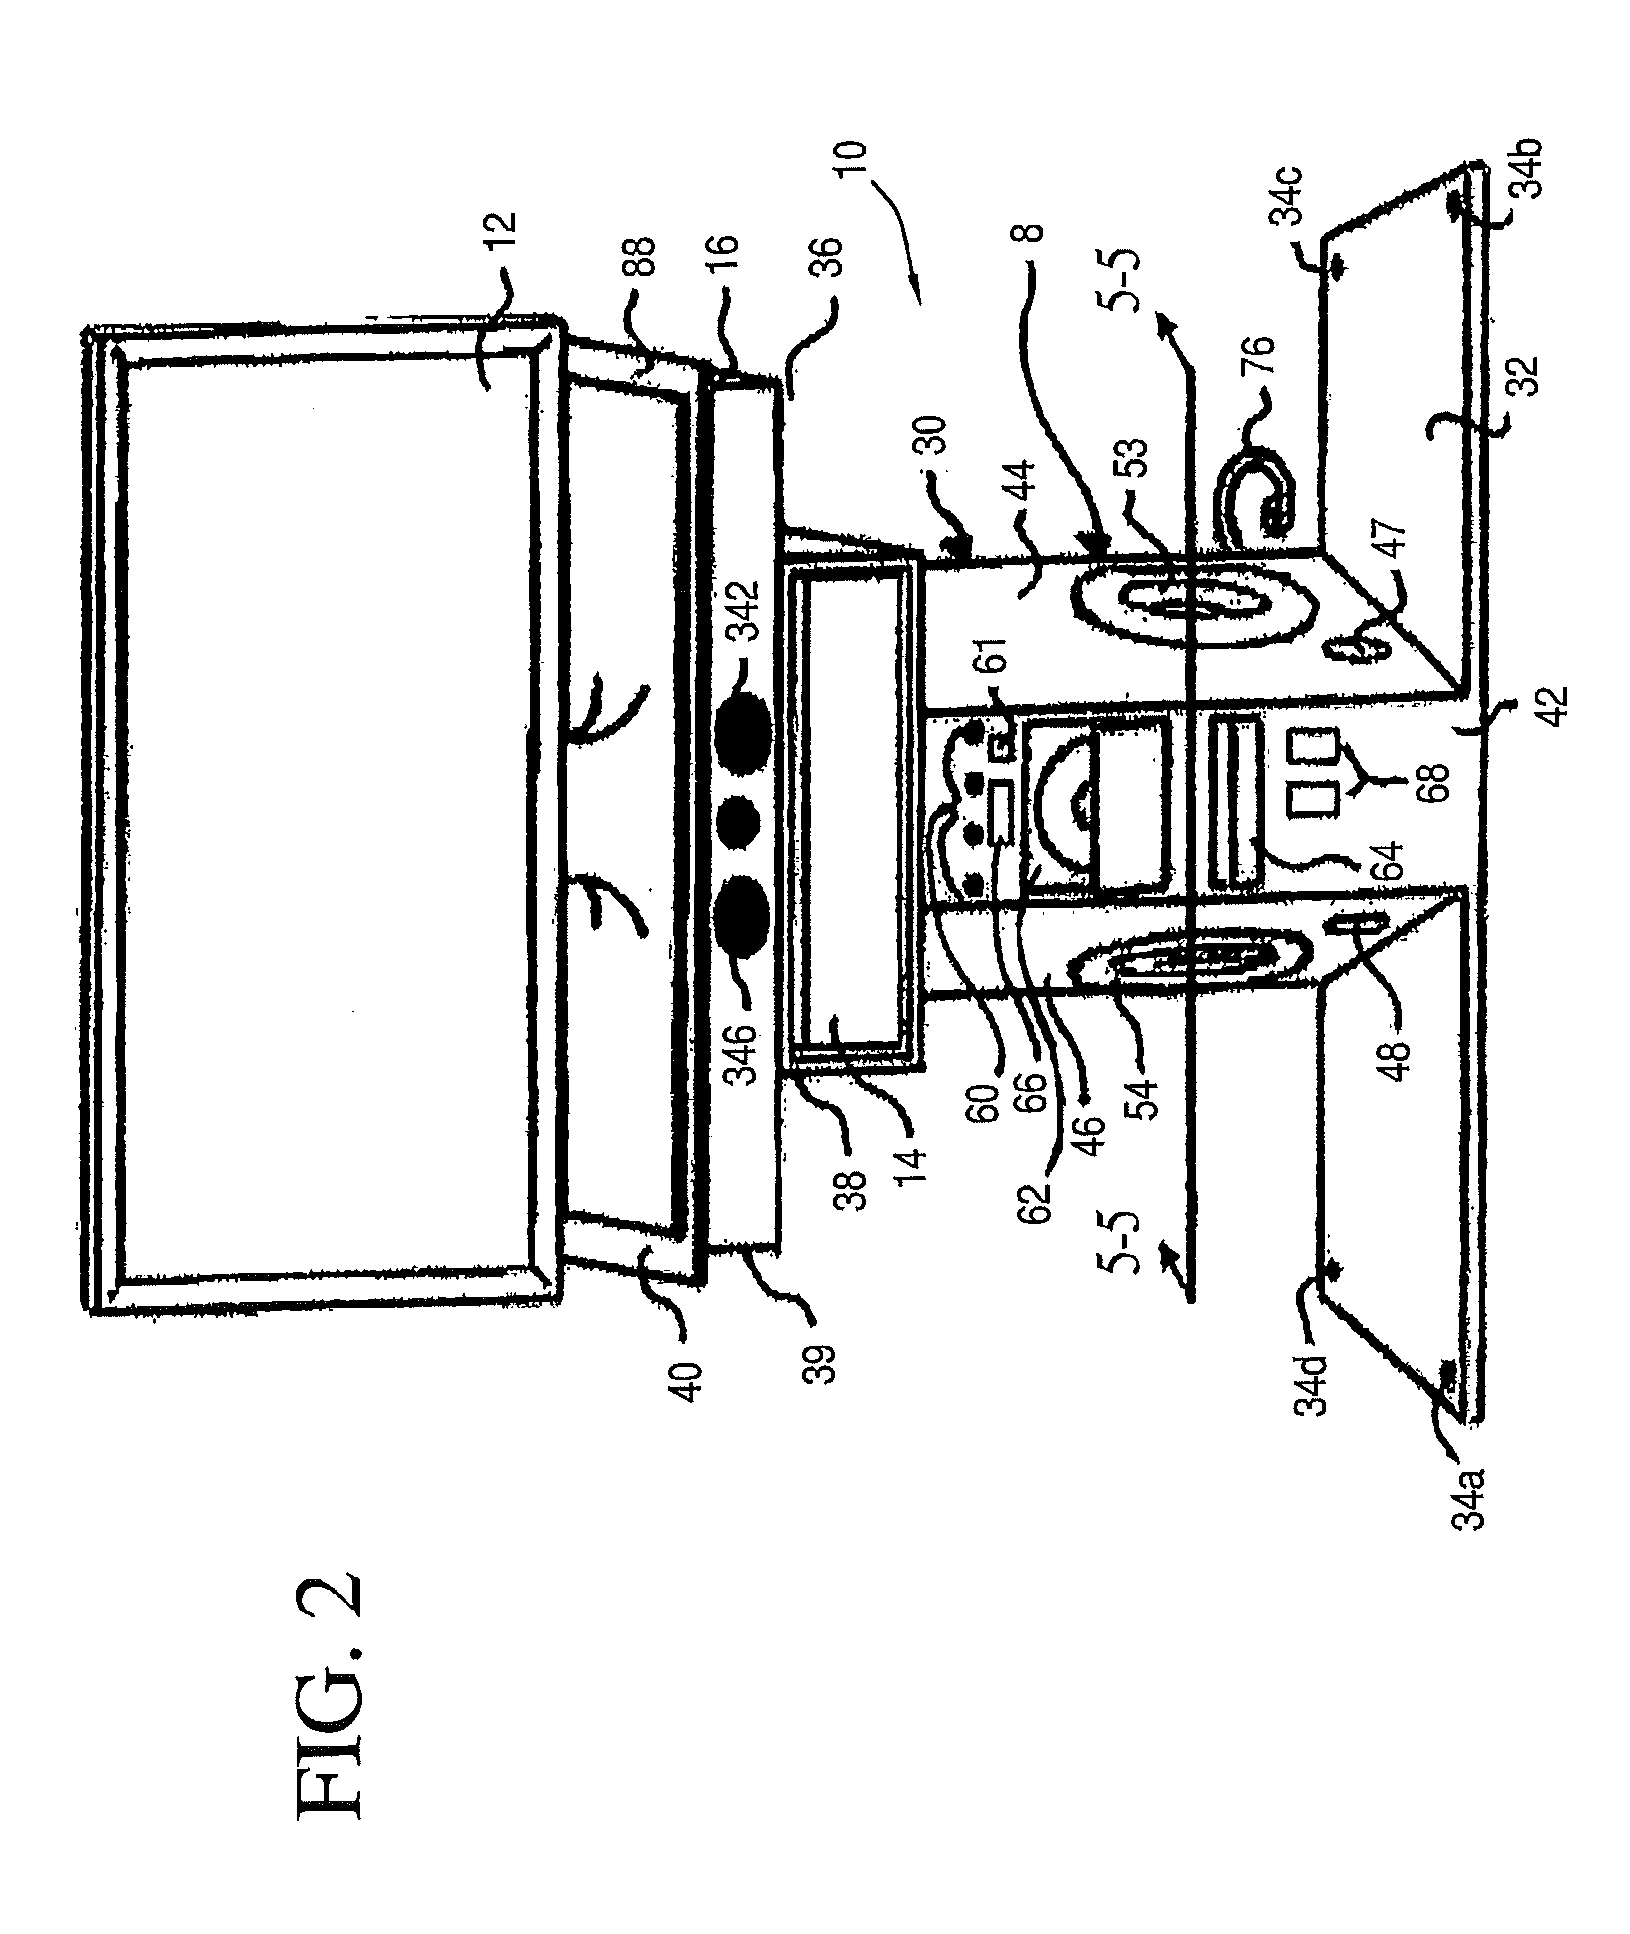 Multi-channel loudspeaker enclosure with laterally projecting wings and method for orienting and driving multiple loudspeakers